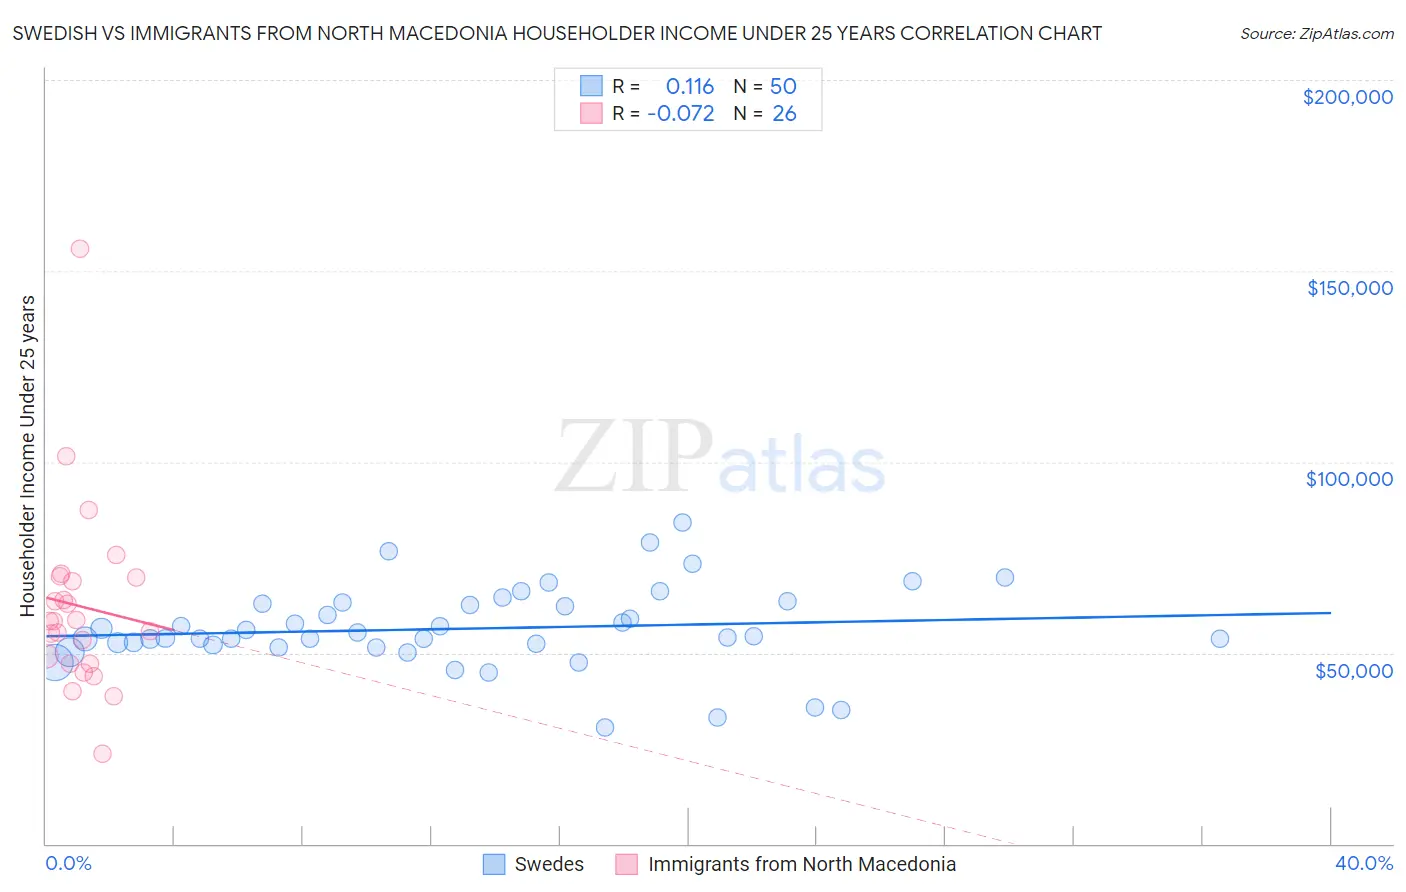 Swedish vs Immigrants from North Macedonia Householder Income Under 25 years